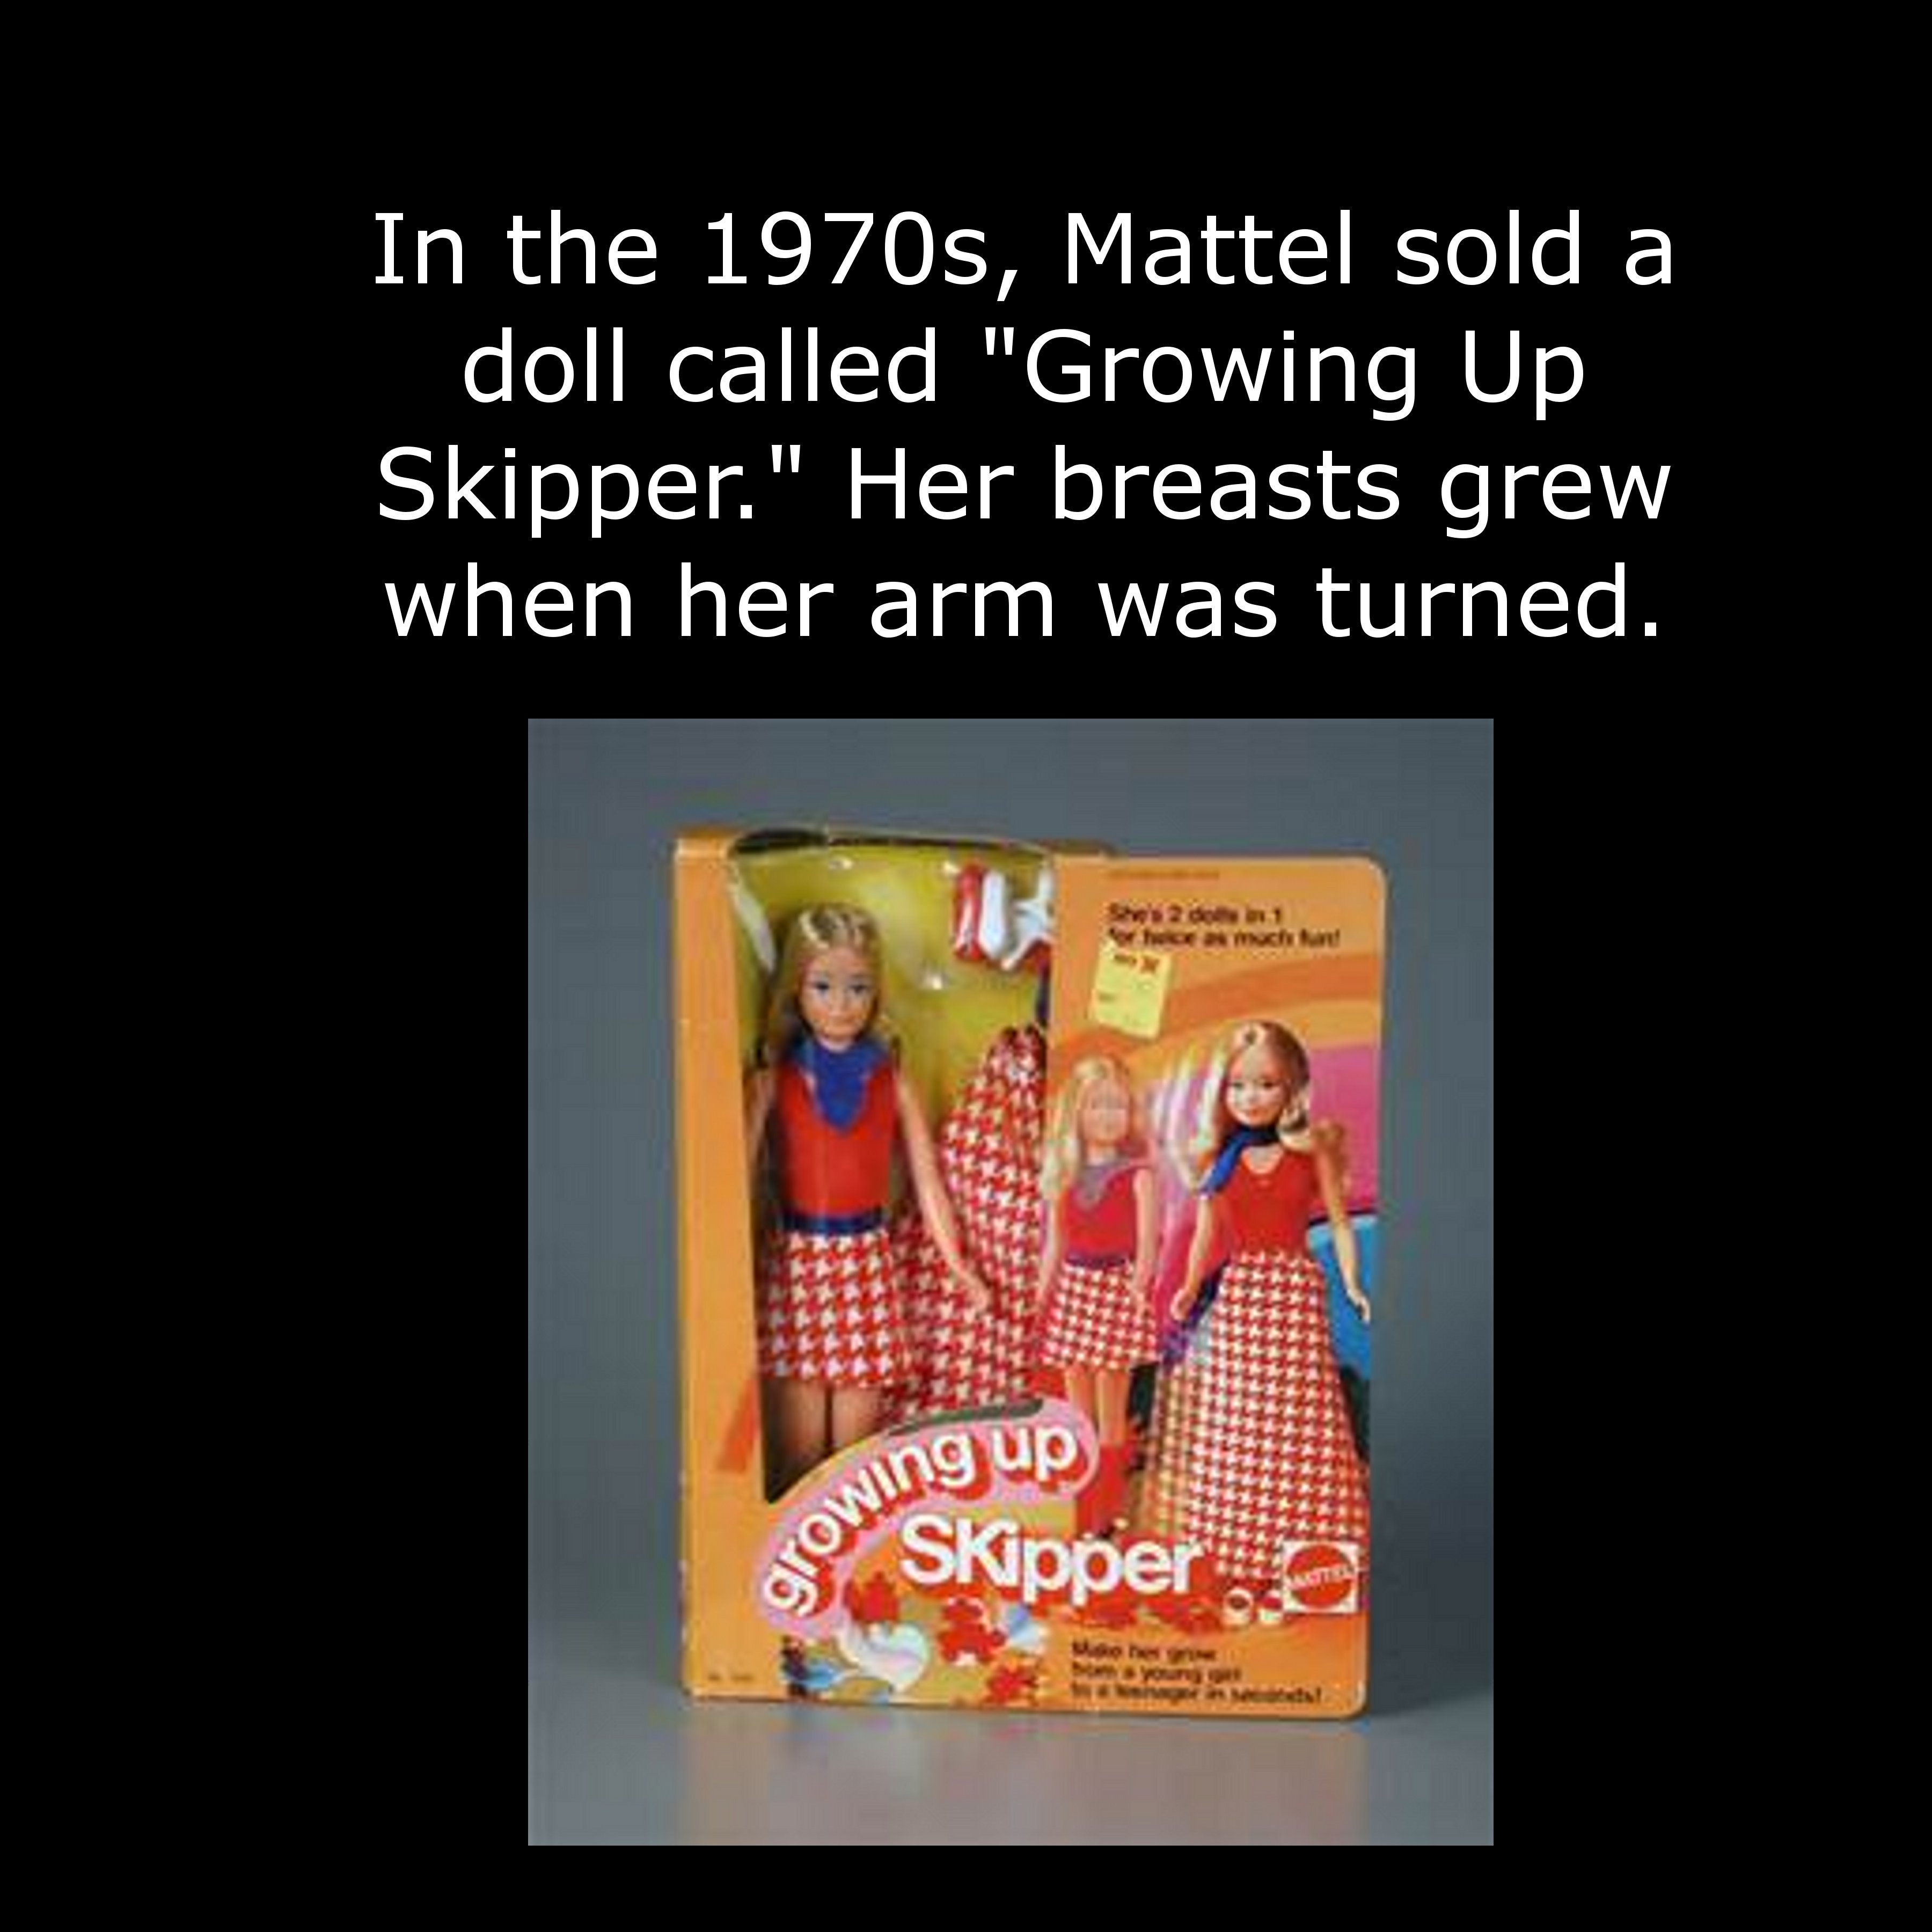 In the 1970s, Mattel sold a doll called "Growing Up Skipper." Her breasts grew when her arm was turned. growing up Skipper